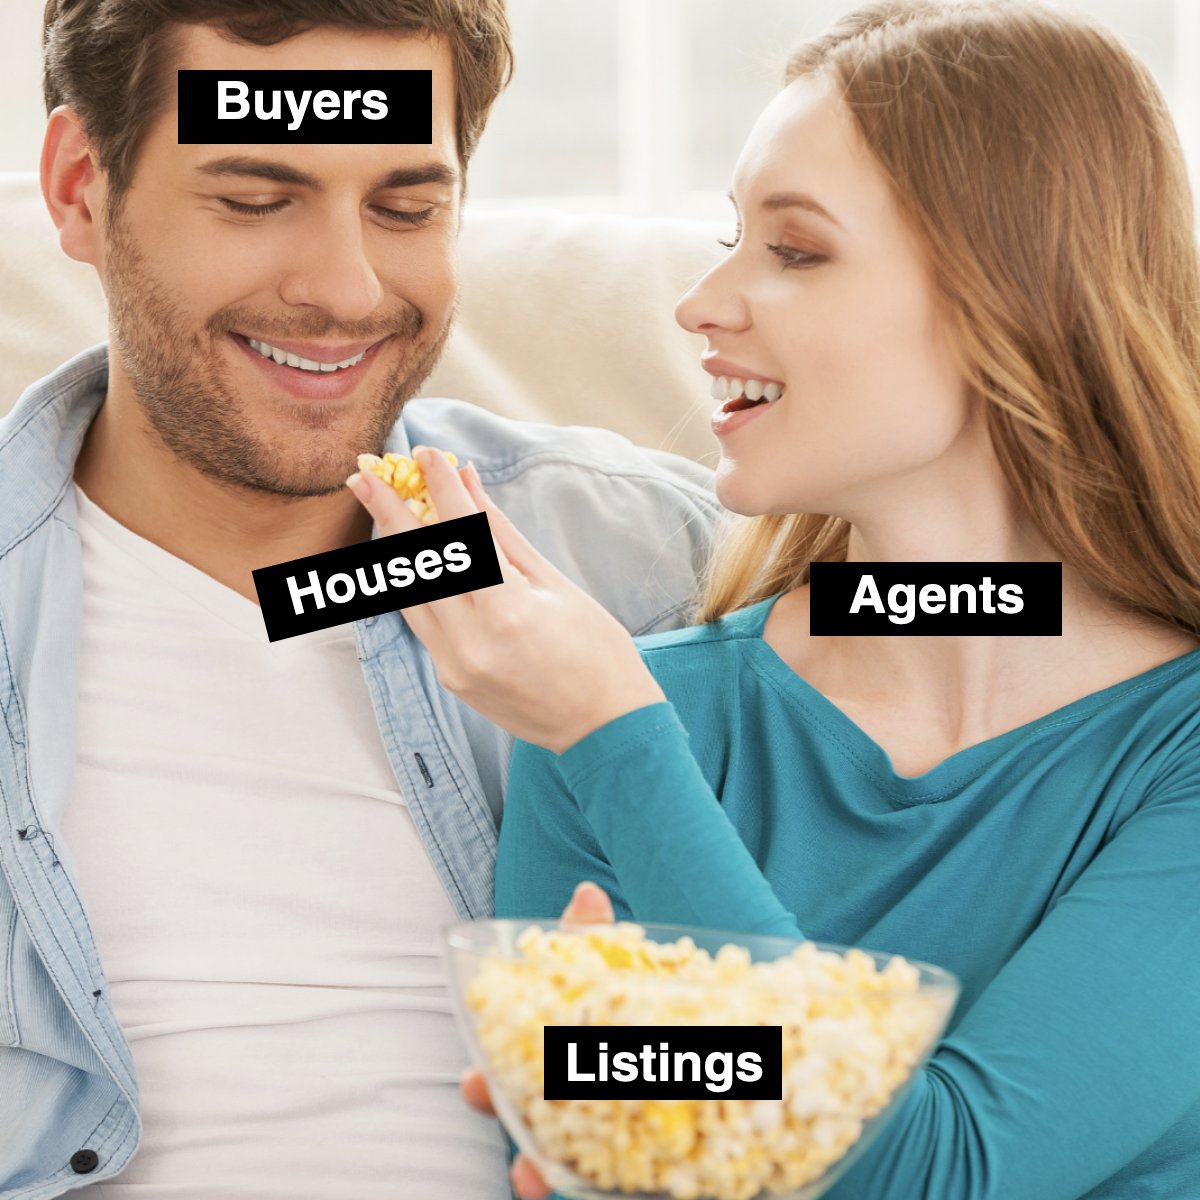 LOL! 😂

#funny #listings #buyers #agents #houses 
 #Realestate #Brokerlife #Marketupdate #thevisiongroup #thevisiongroupres #realtor #Orangecounty #losangelescounty #Riversidecounty #downpaymentassistance #Realestatetips #Firstimebuyer #mortgageadvice